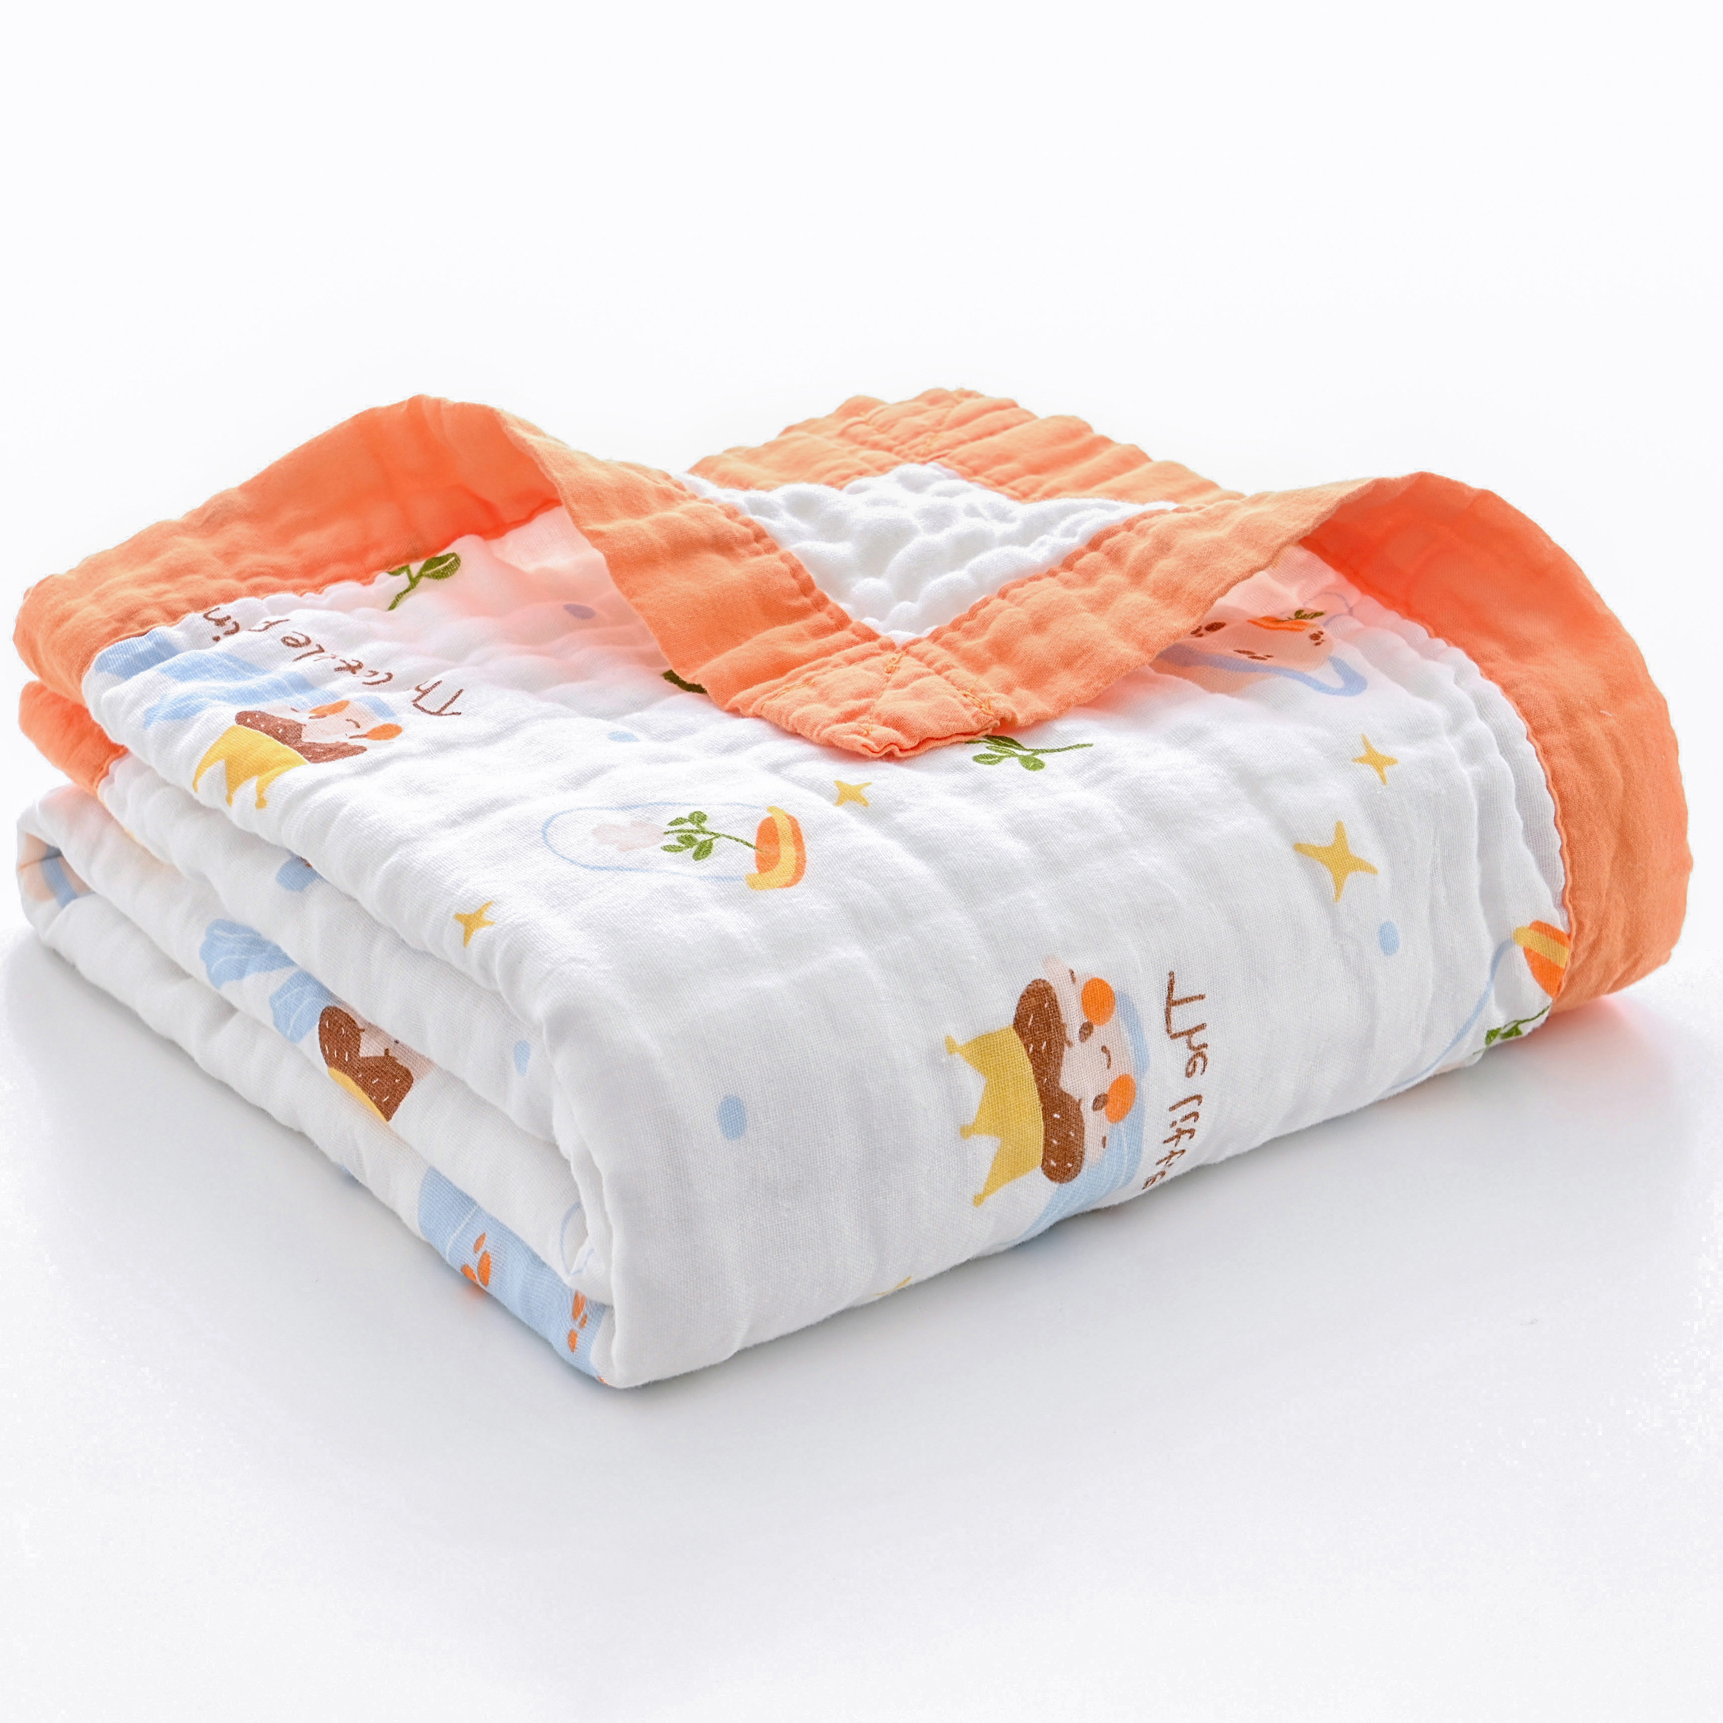 Baby/Toddler Muslin Cotton Blanket - The Little Prince